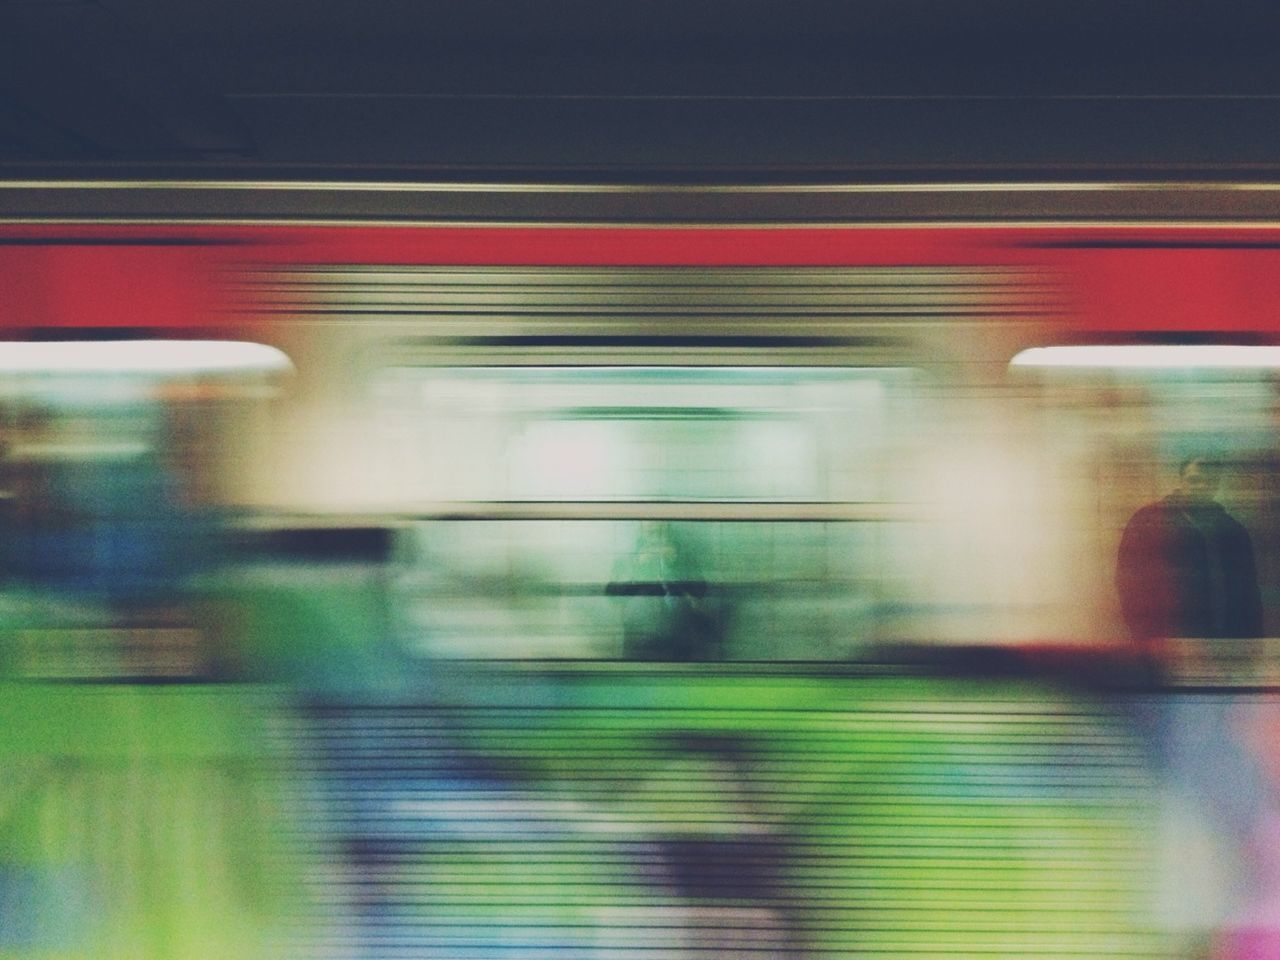 Train in blurred motion